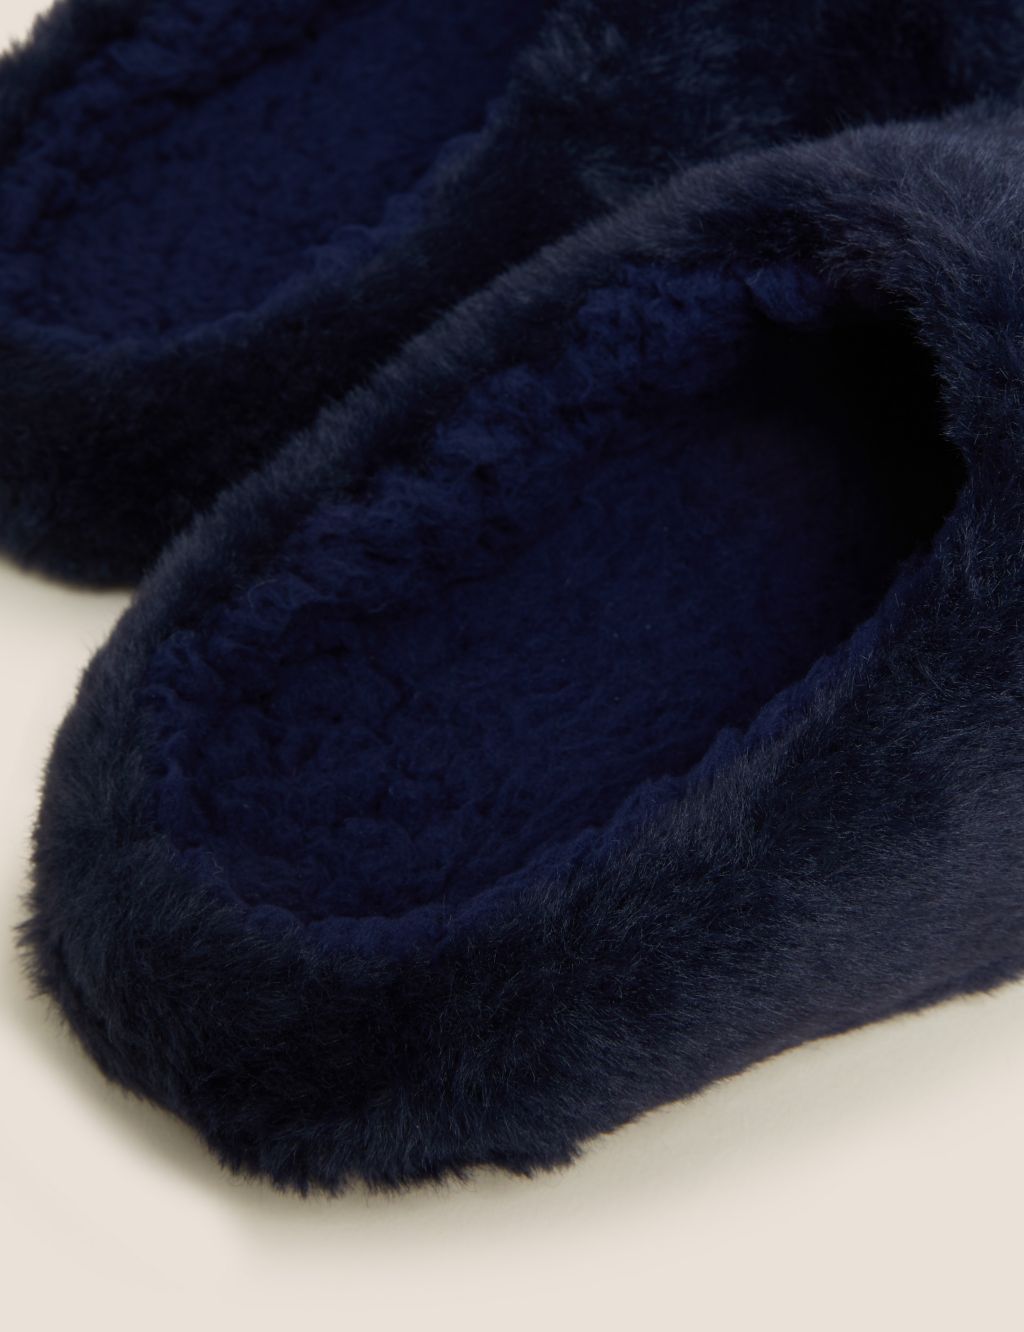 Kids' Faux Fur Slippers (13 Small - 7 large) image 3